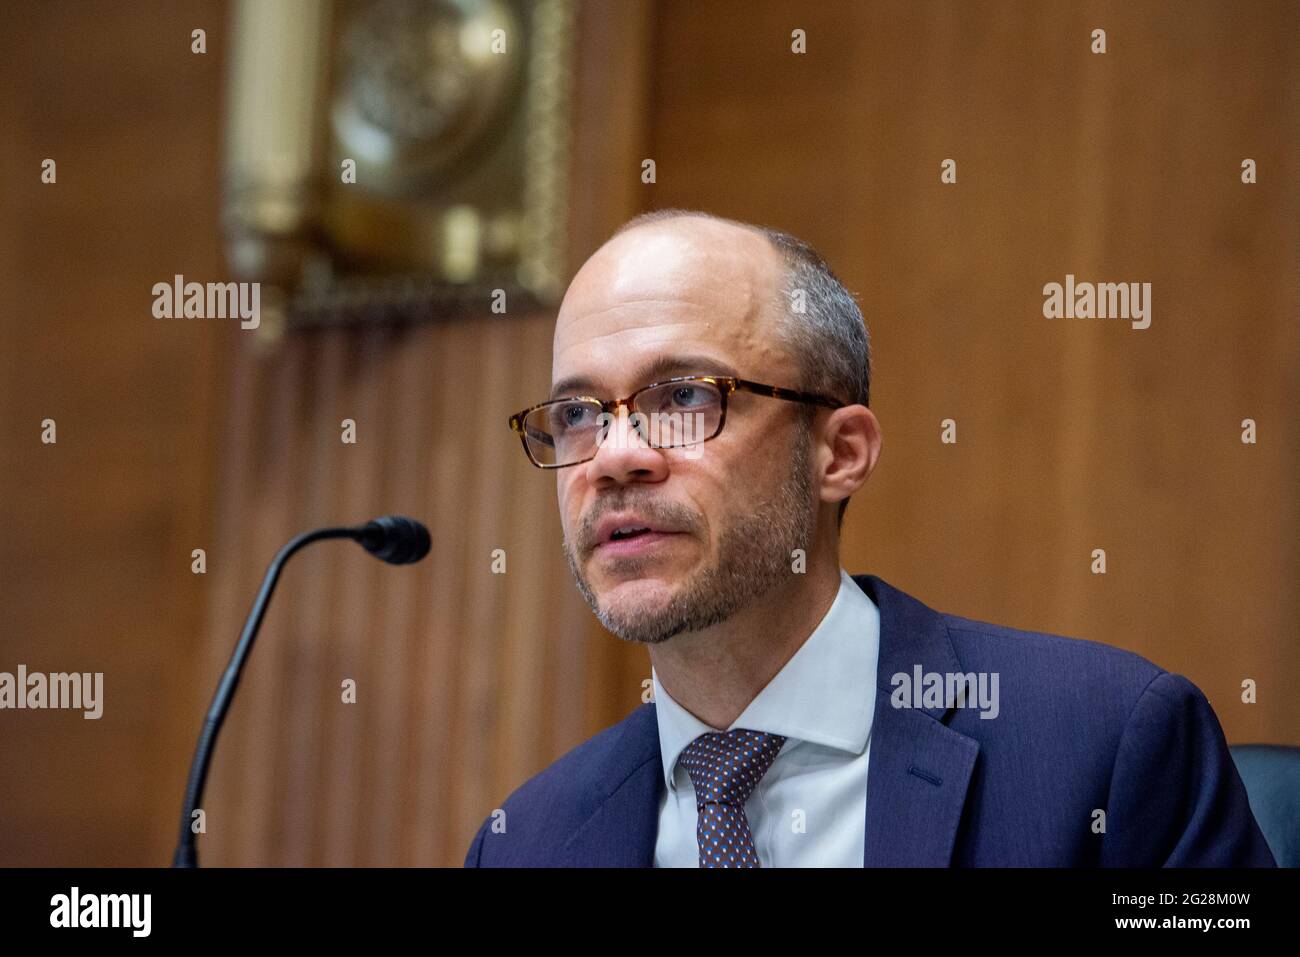 Samuel T. Walsh appears before a Senate Committee on Energy and Natural Resources hearing for his nomination to be General Counsel, Department of Energy, in the Dirksen Senate Office Building in Washington, DC, Tuesday, June 8, 2021. Credit: Rod Lamkey / CNP/Sipa USA Stock Photo